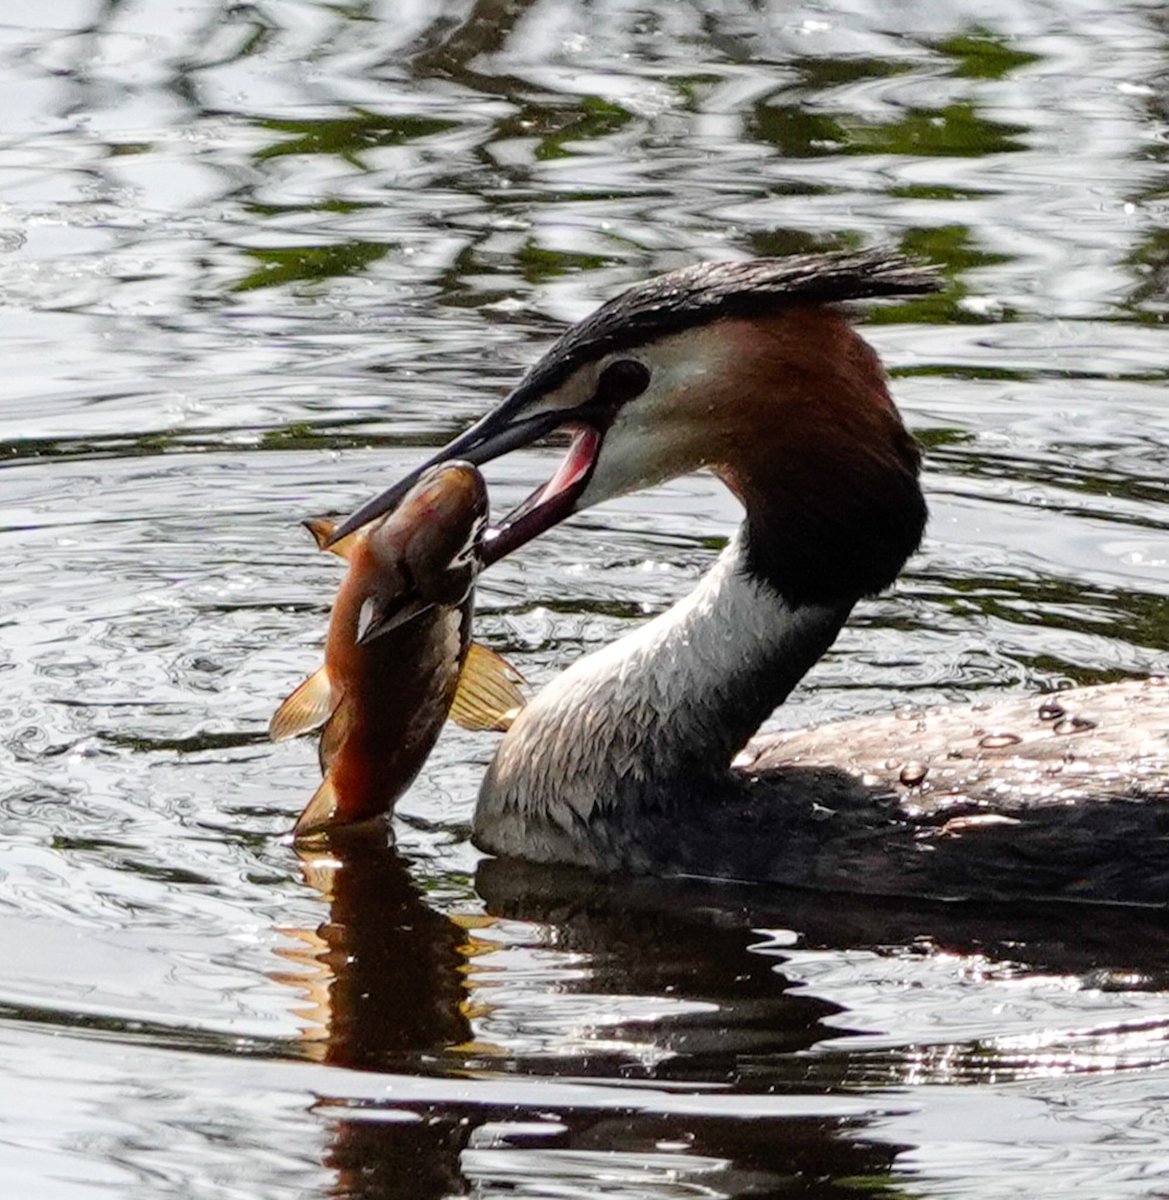 Great crested grebe with supper @AvalonMarshes